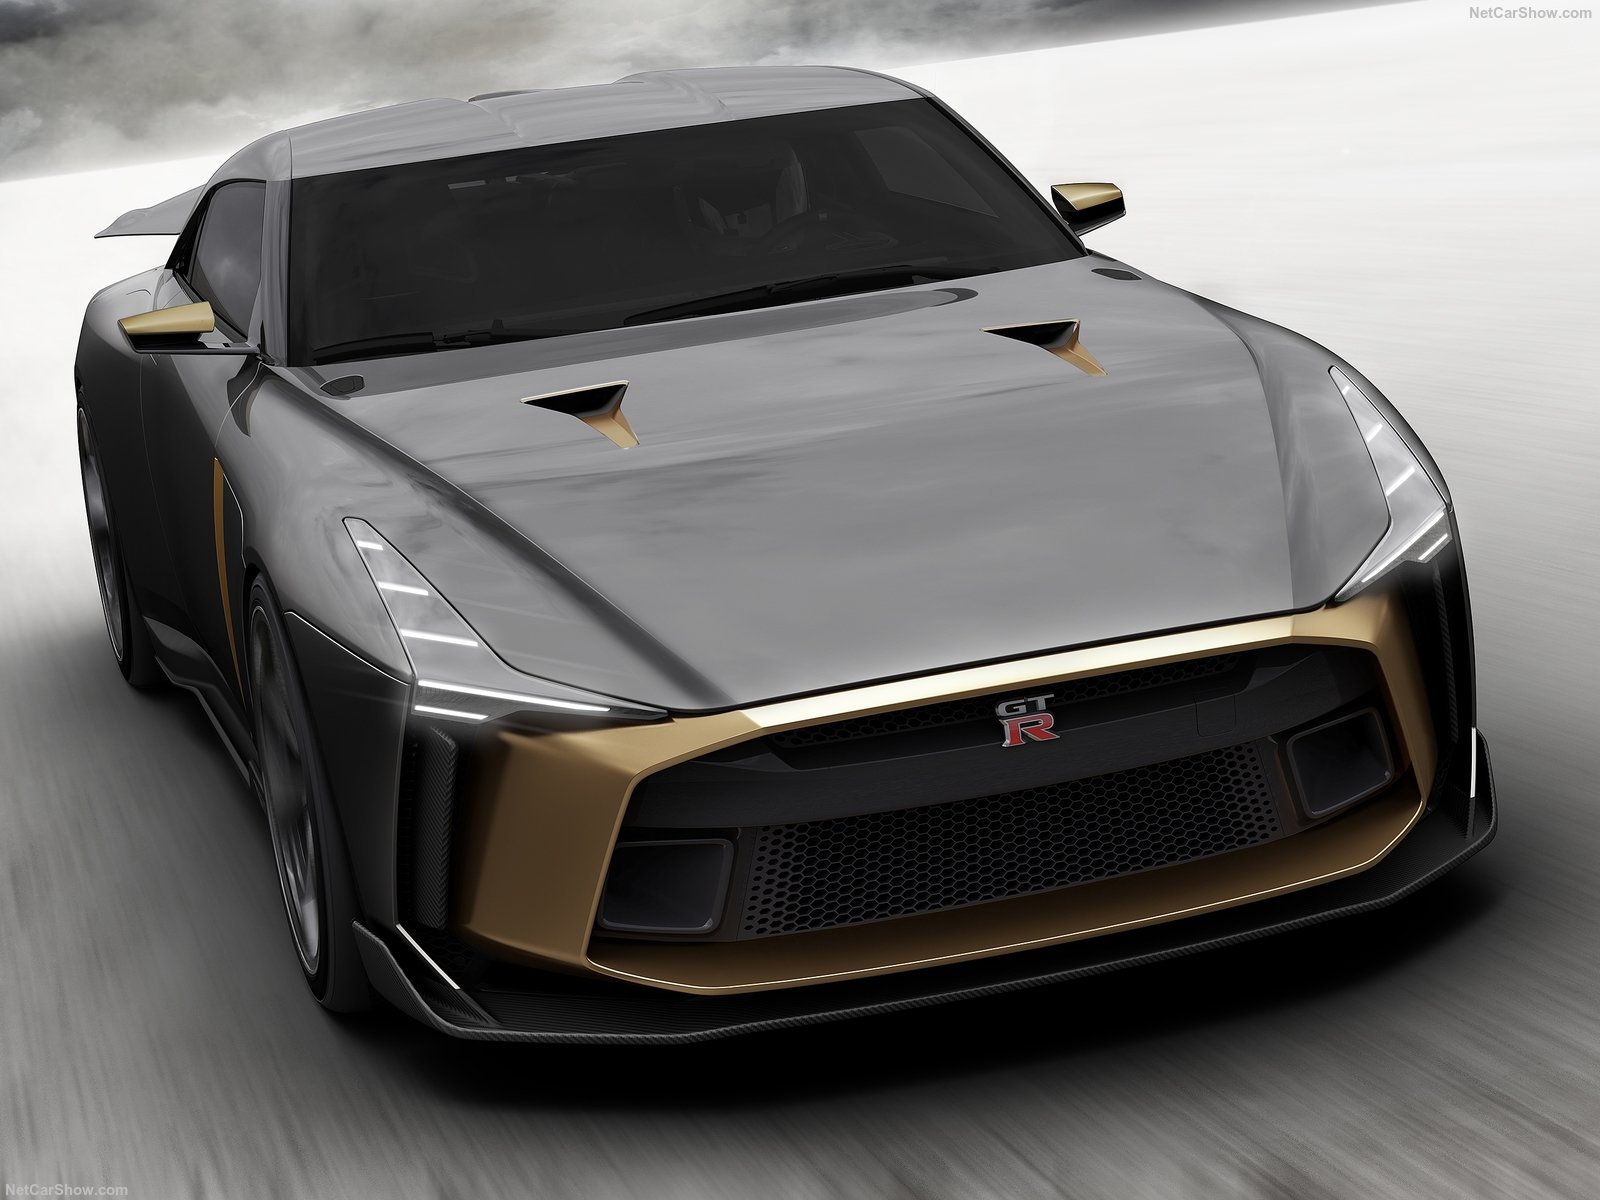 General 1600x1200 Nissan GT-R50 car Nissan watermarked Japanese cars vehicle headlights concept cars frontal view motion blur